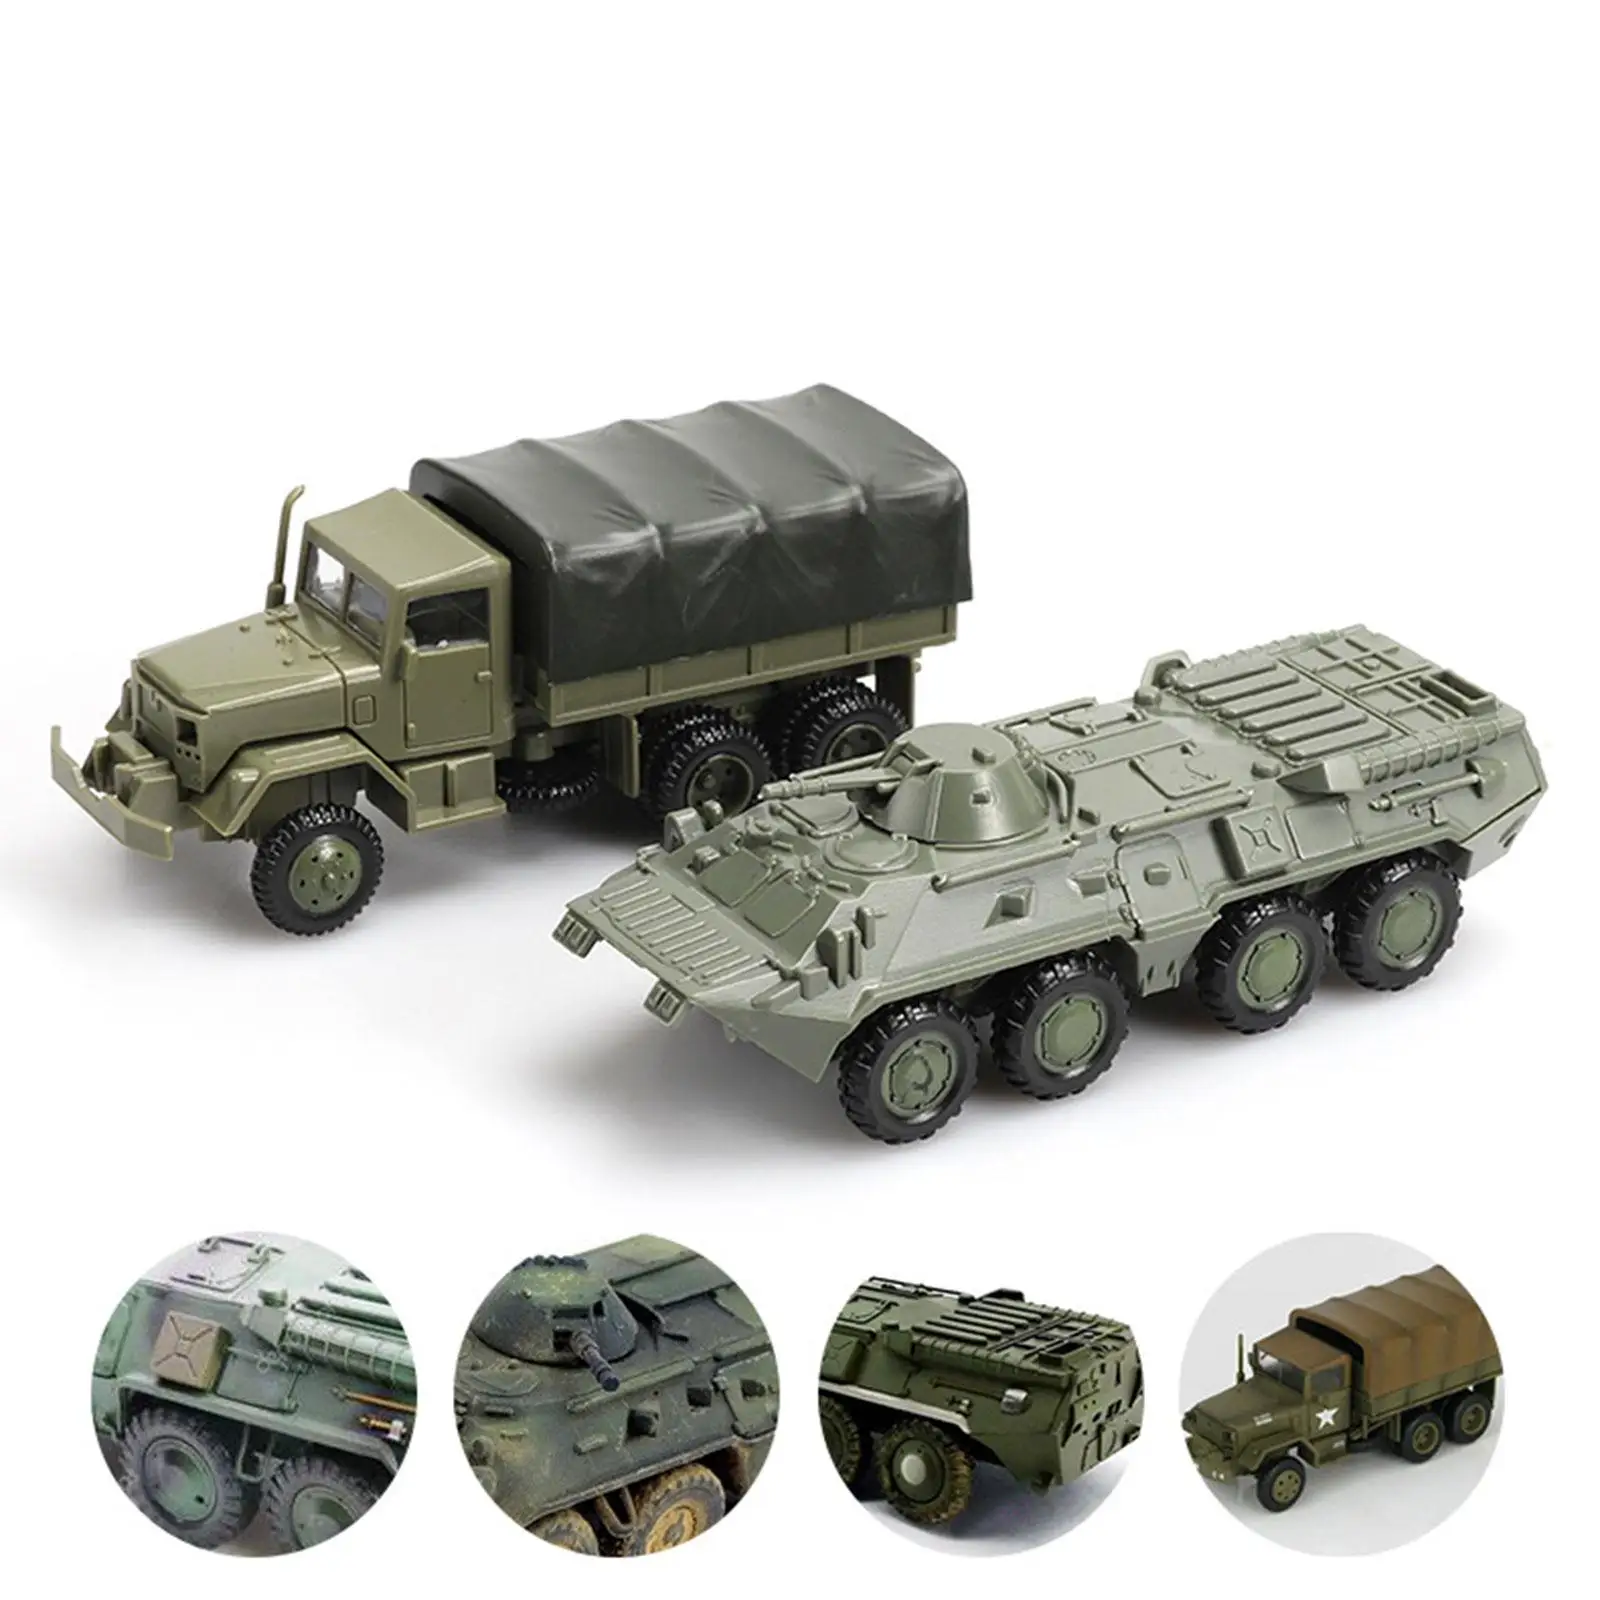 2 Pieces Assembly Model Toy Car Vehicle Model Toys for Role Play Playroom Indoor